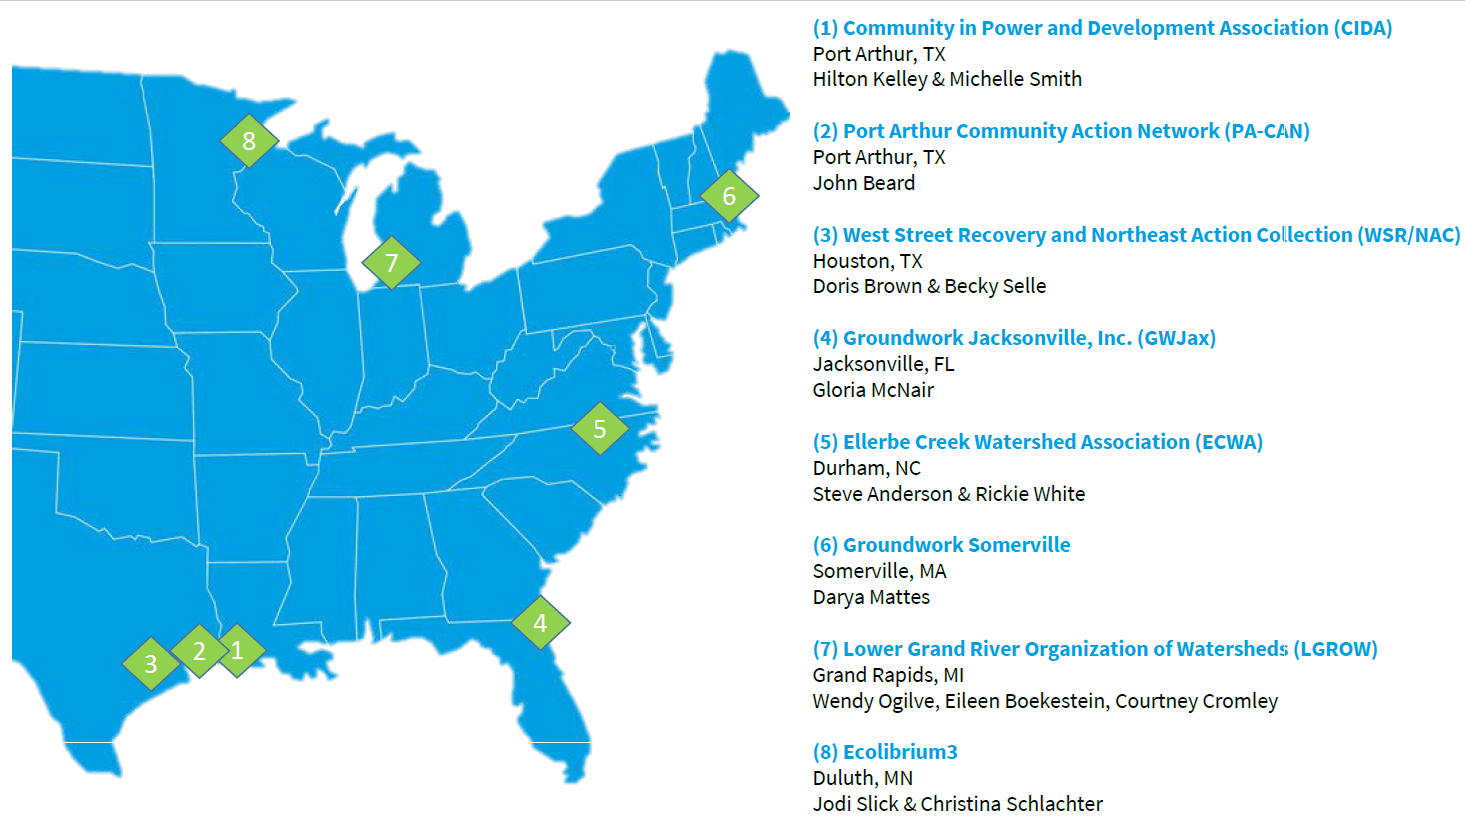 Map of the eastern US showing the locations of River Network's CLR grantee organizations.